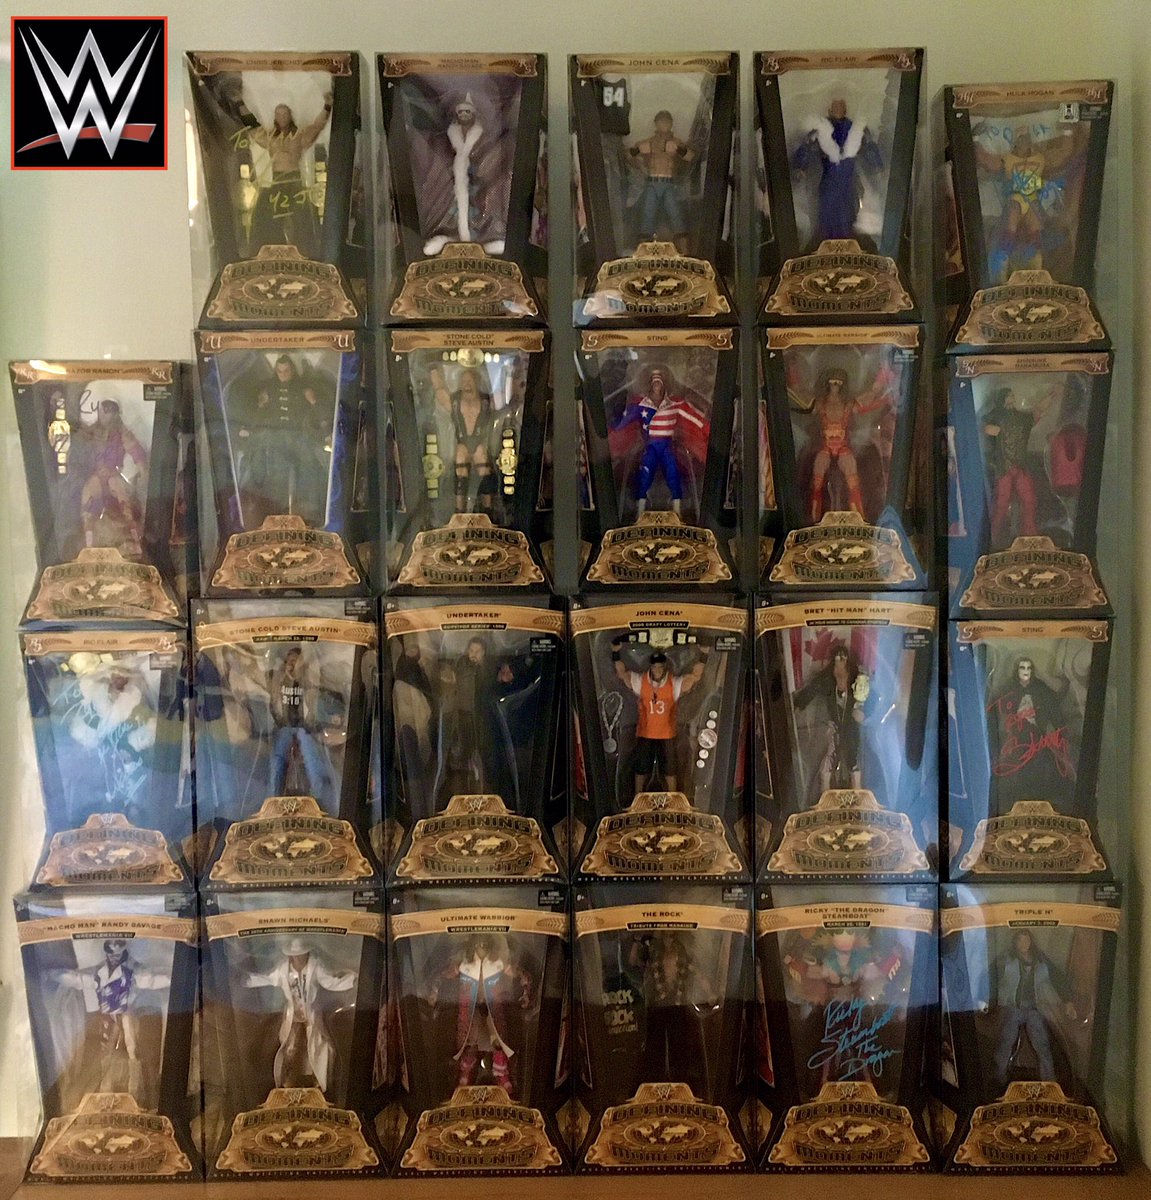 WWE Defining Moments Figures. Complete collection now in protective cases, courtesy of #dcdeflectors! No chance of letting them breathe! Itch scratched! #hWo #onefigcommunity